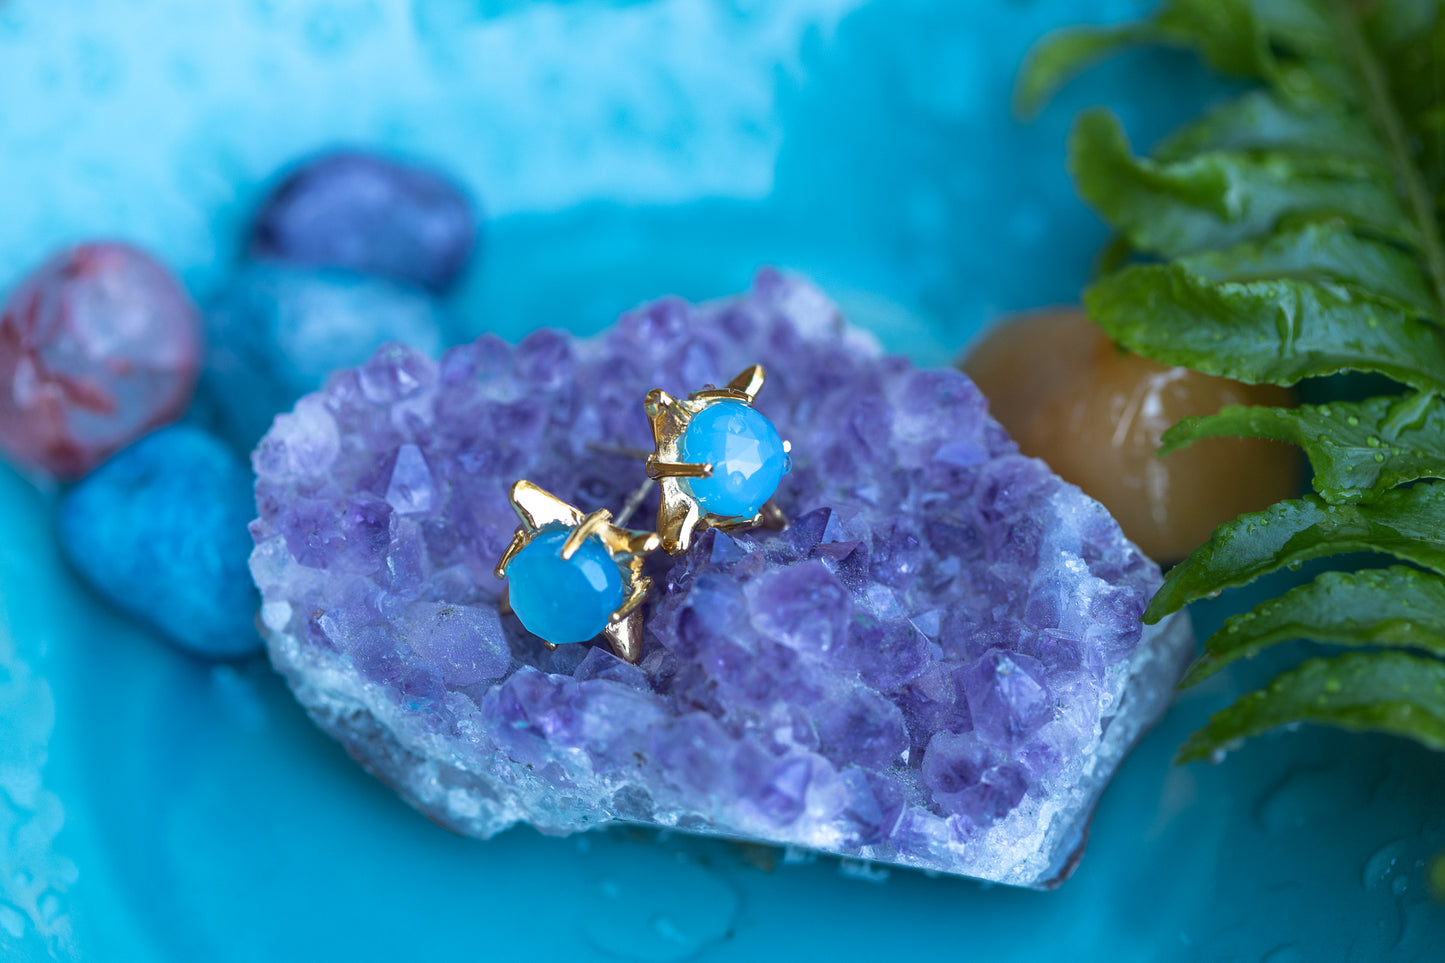 Small Pagoda Pyramid Stud with Faceted Blue Chalcedony